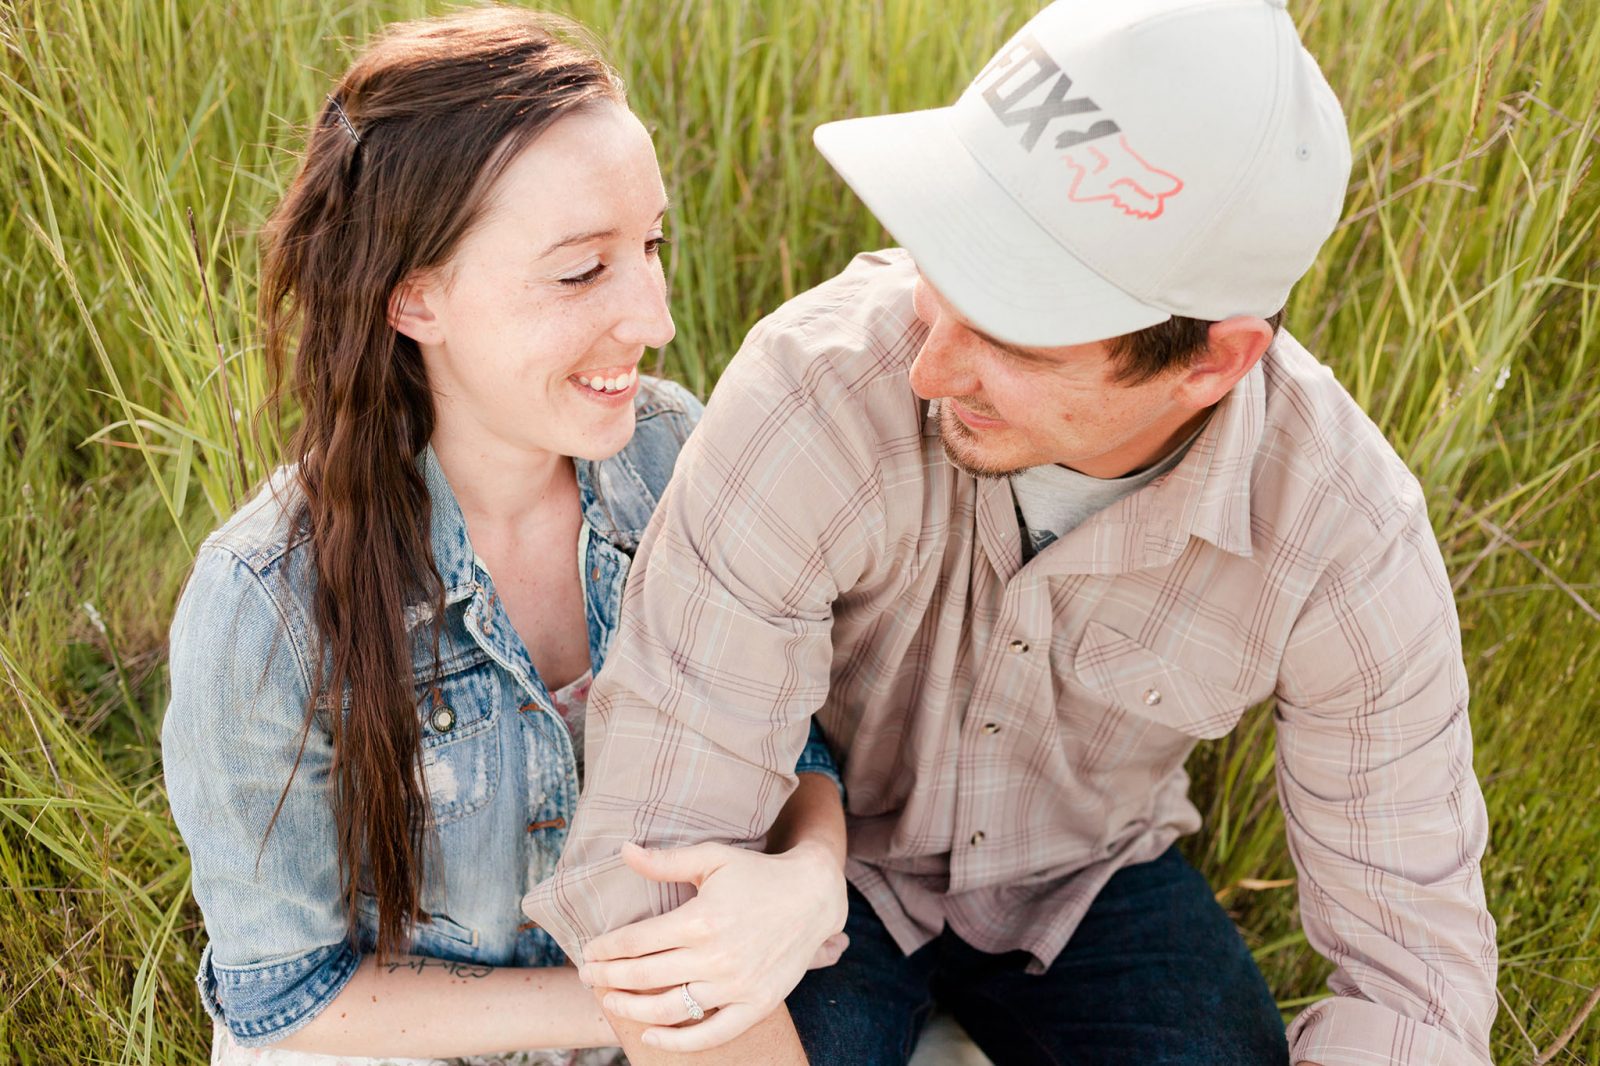 country themed engagement session in a field - hillsboro oregon wedding photographer